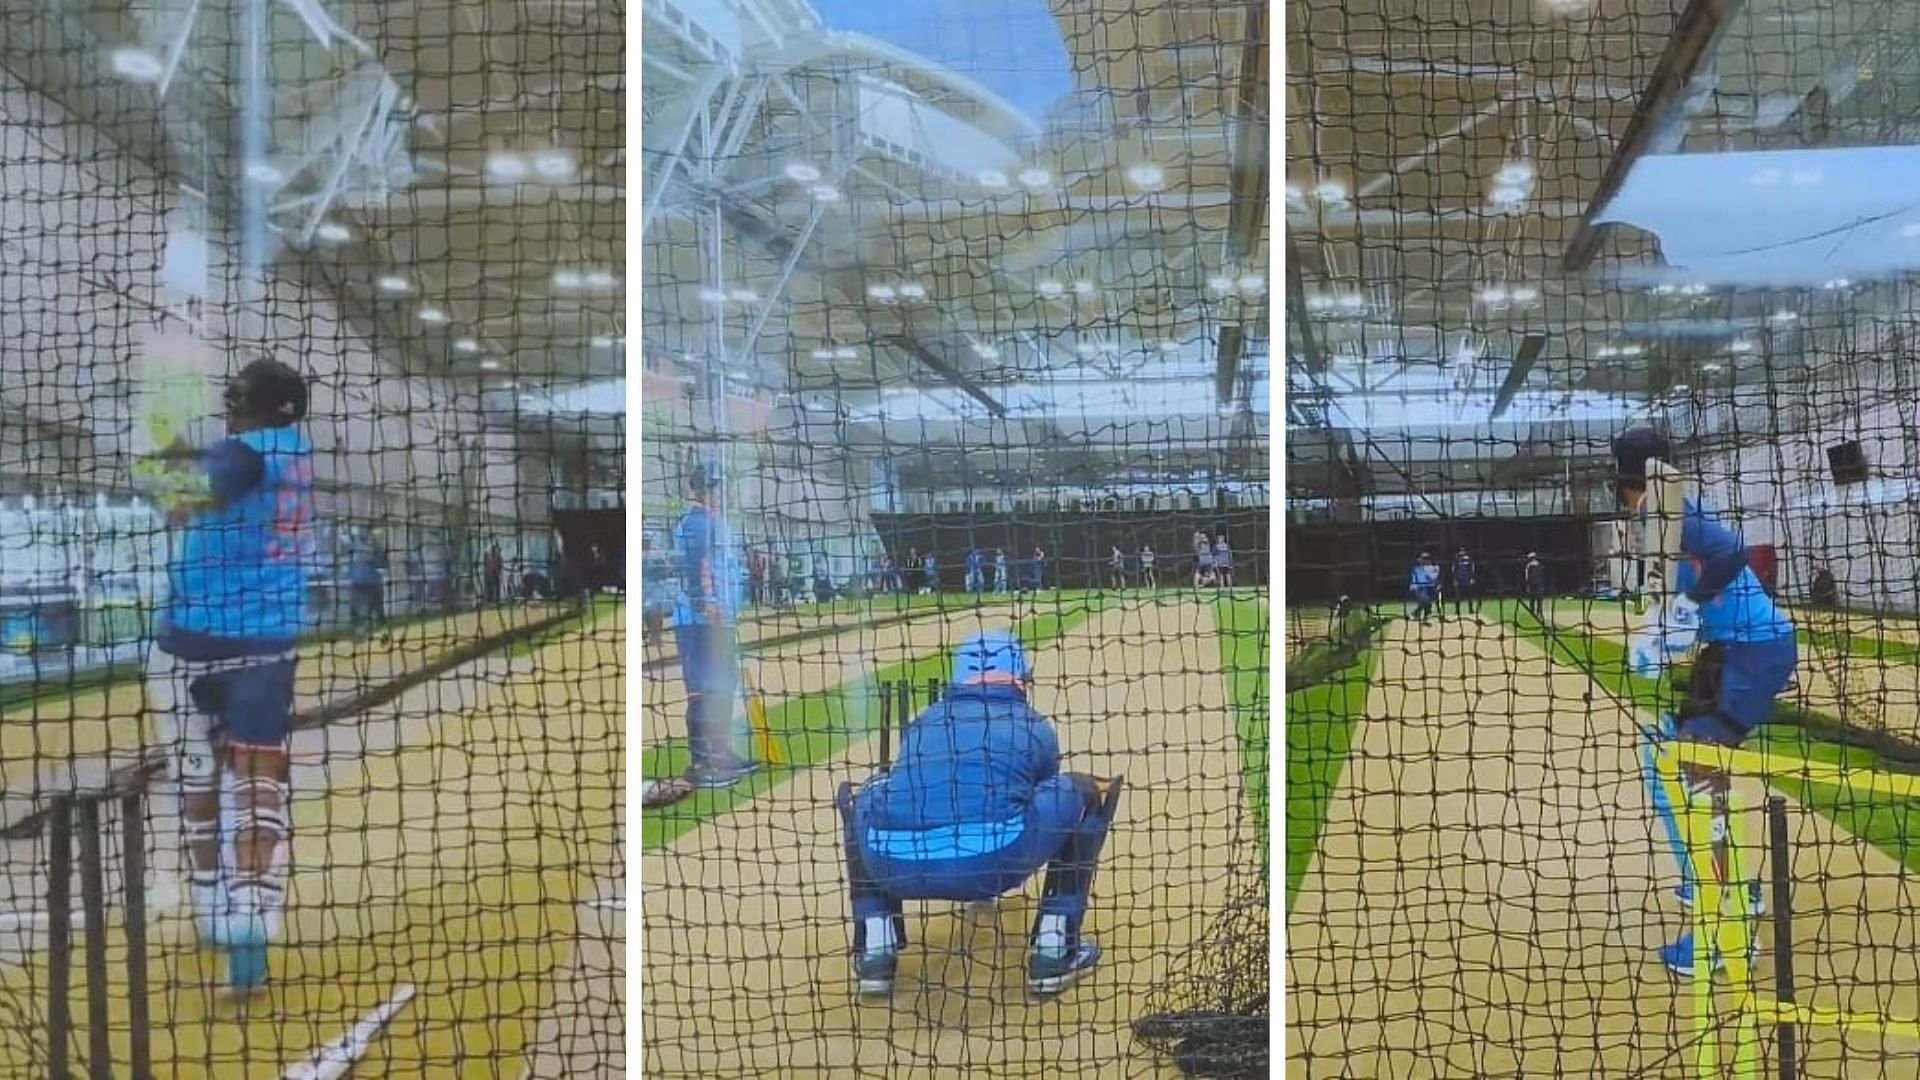 [Watch] Ashwin, DK & Axar in focus as Team India hit indoor nets at Adelaide ahead of Bangladesh clash at T20 World Cup 2022